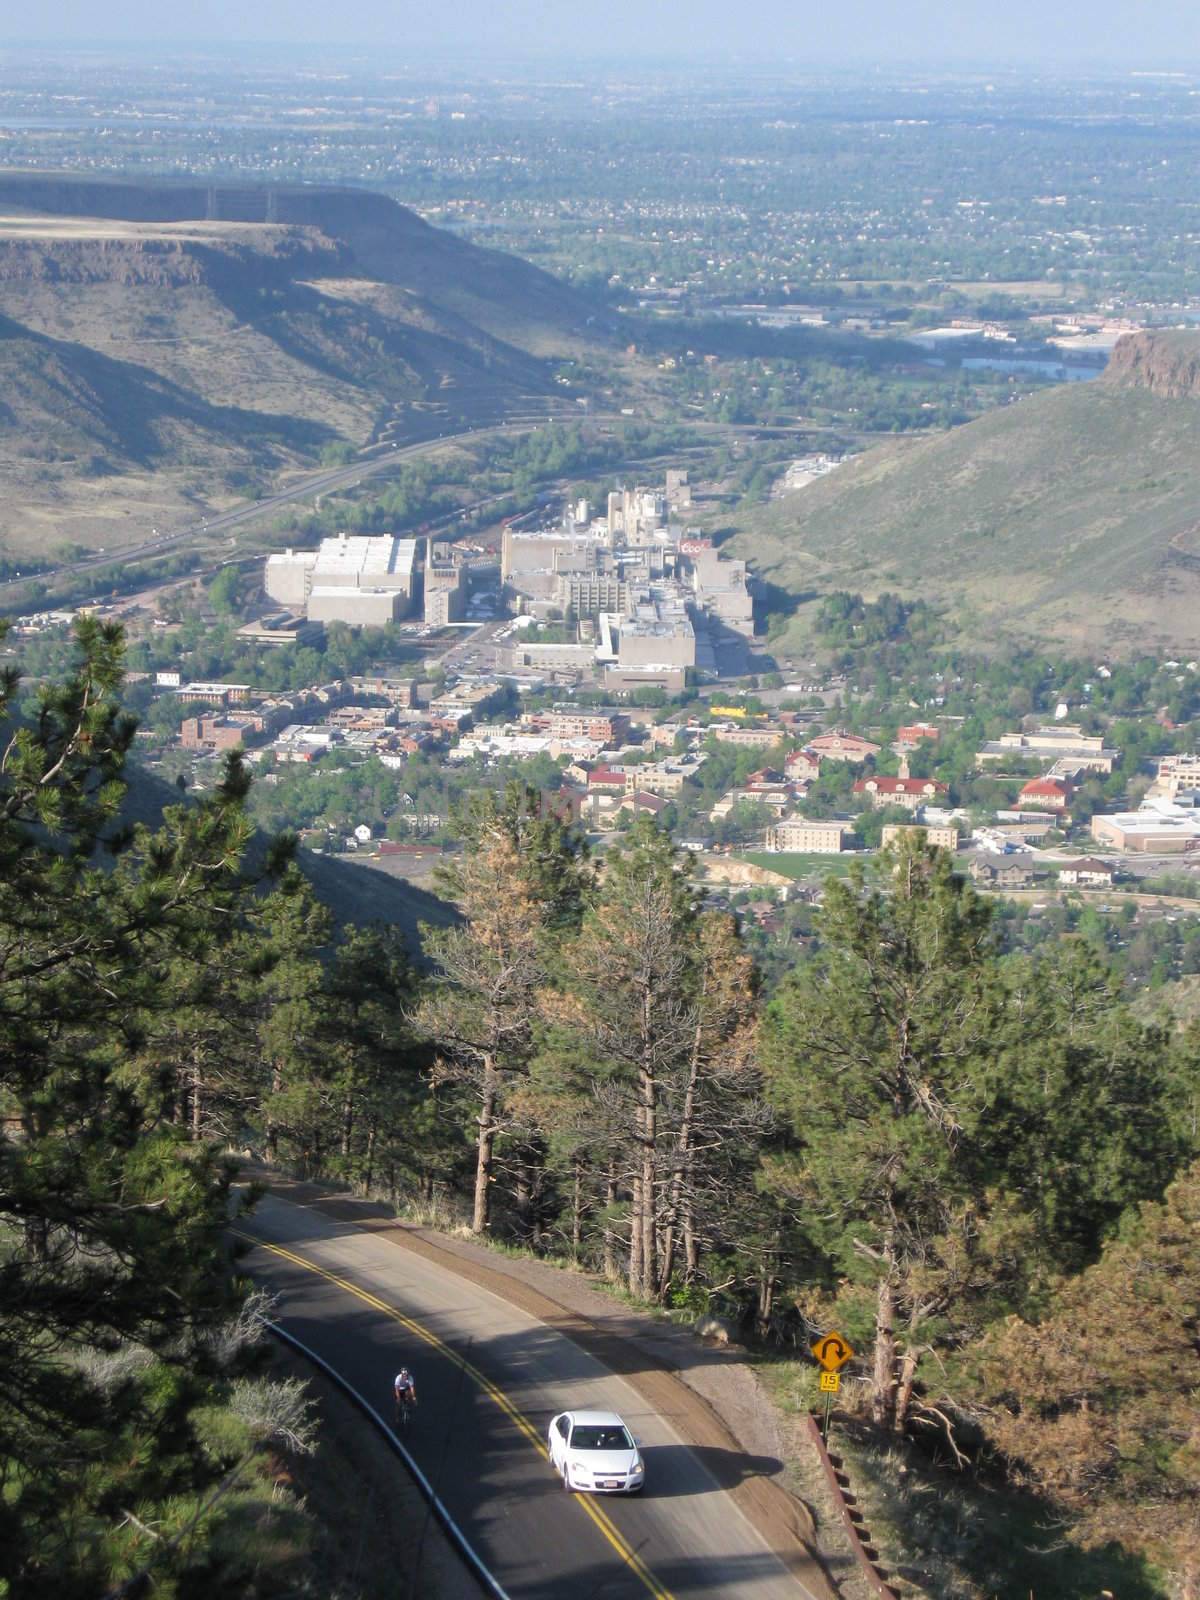 Coors Brewery from a hiking trail.